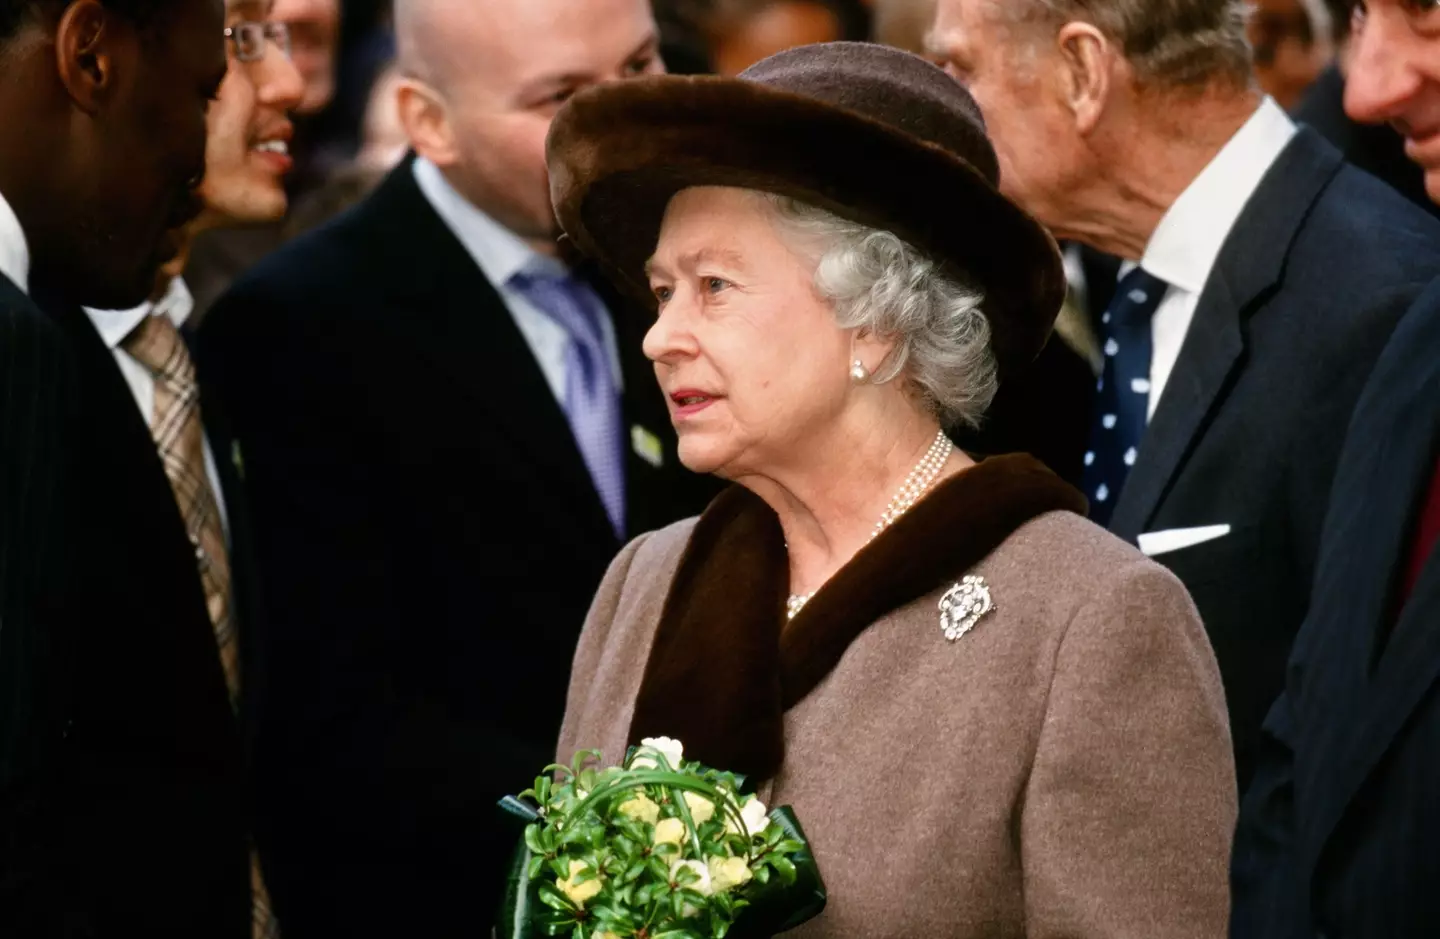 The Queen is expected to only be laid to rest with two pieces of jewellery.